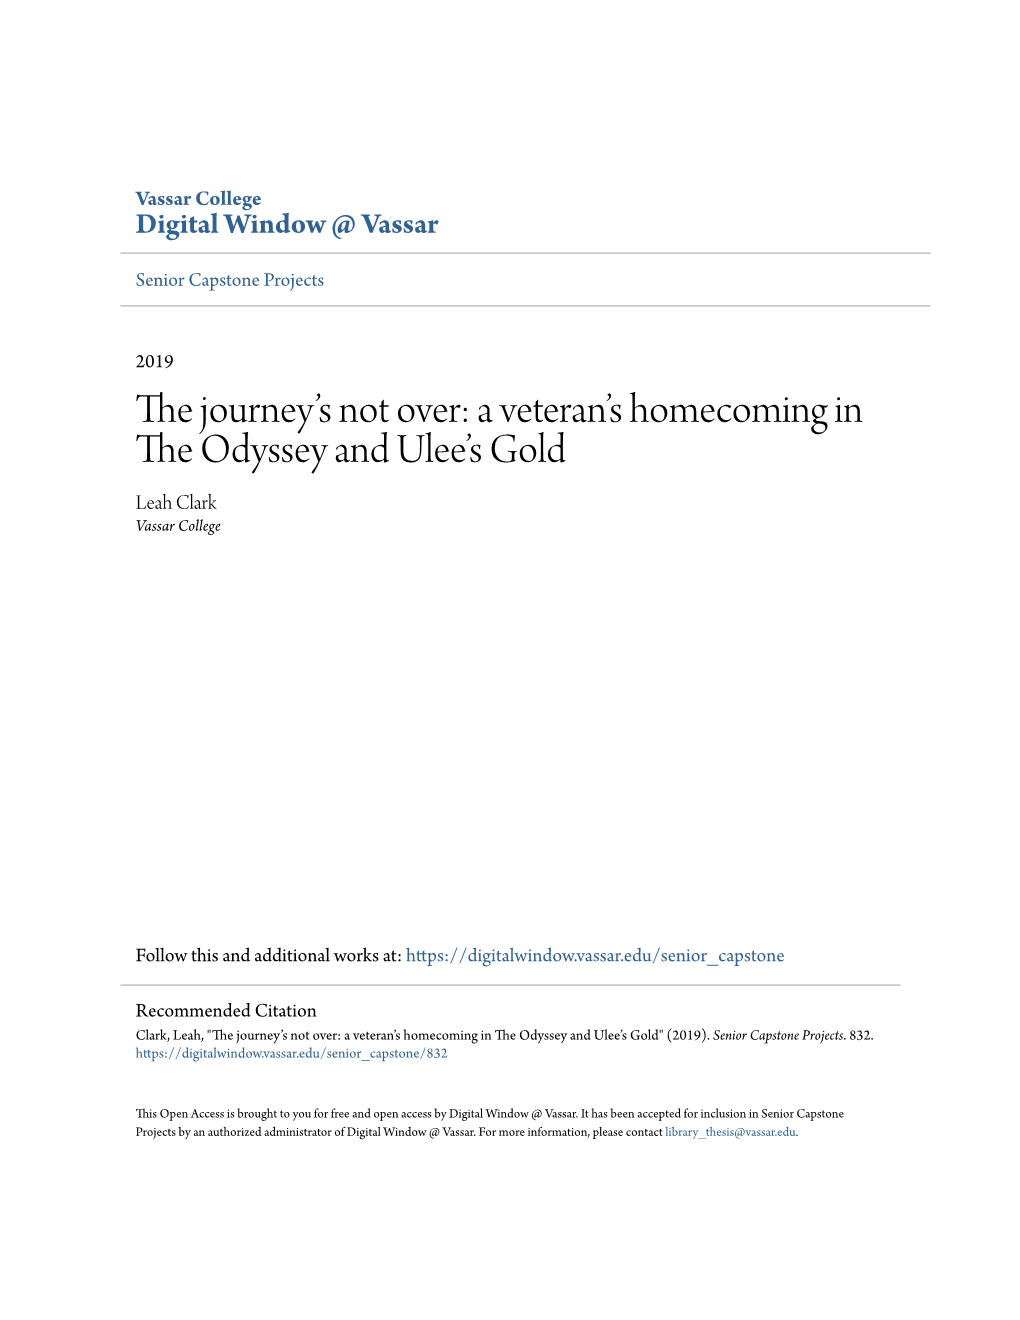 A Veteran's Homecoming in the Odyssey and Ulee's Gold